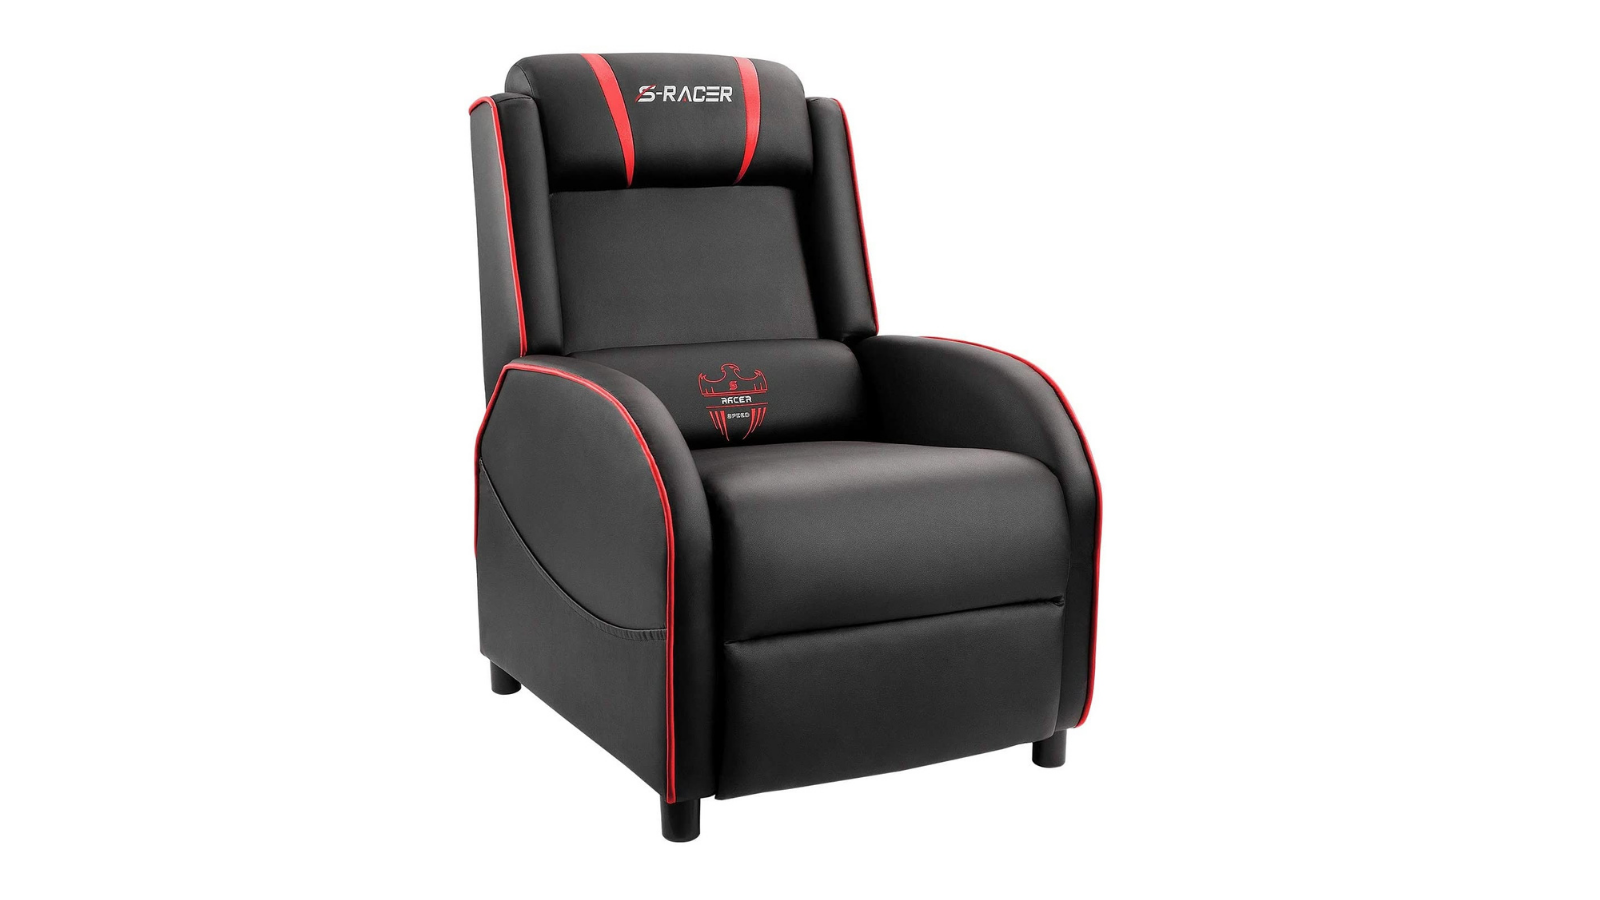 Save 28% on the Homall Gaming Recliner Chair. - Dot Esports